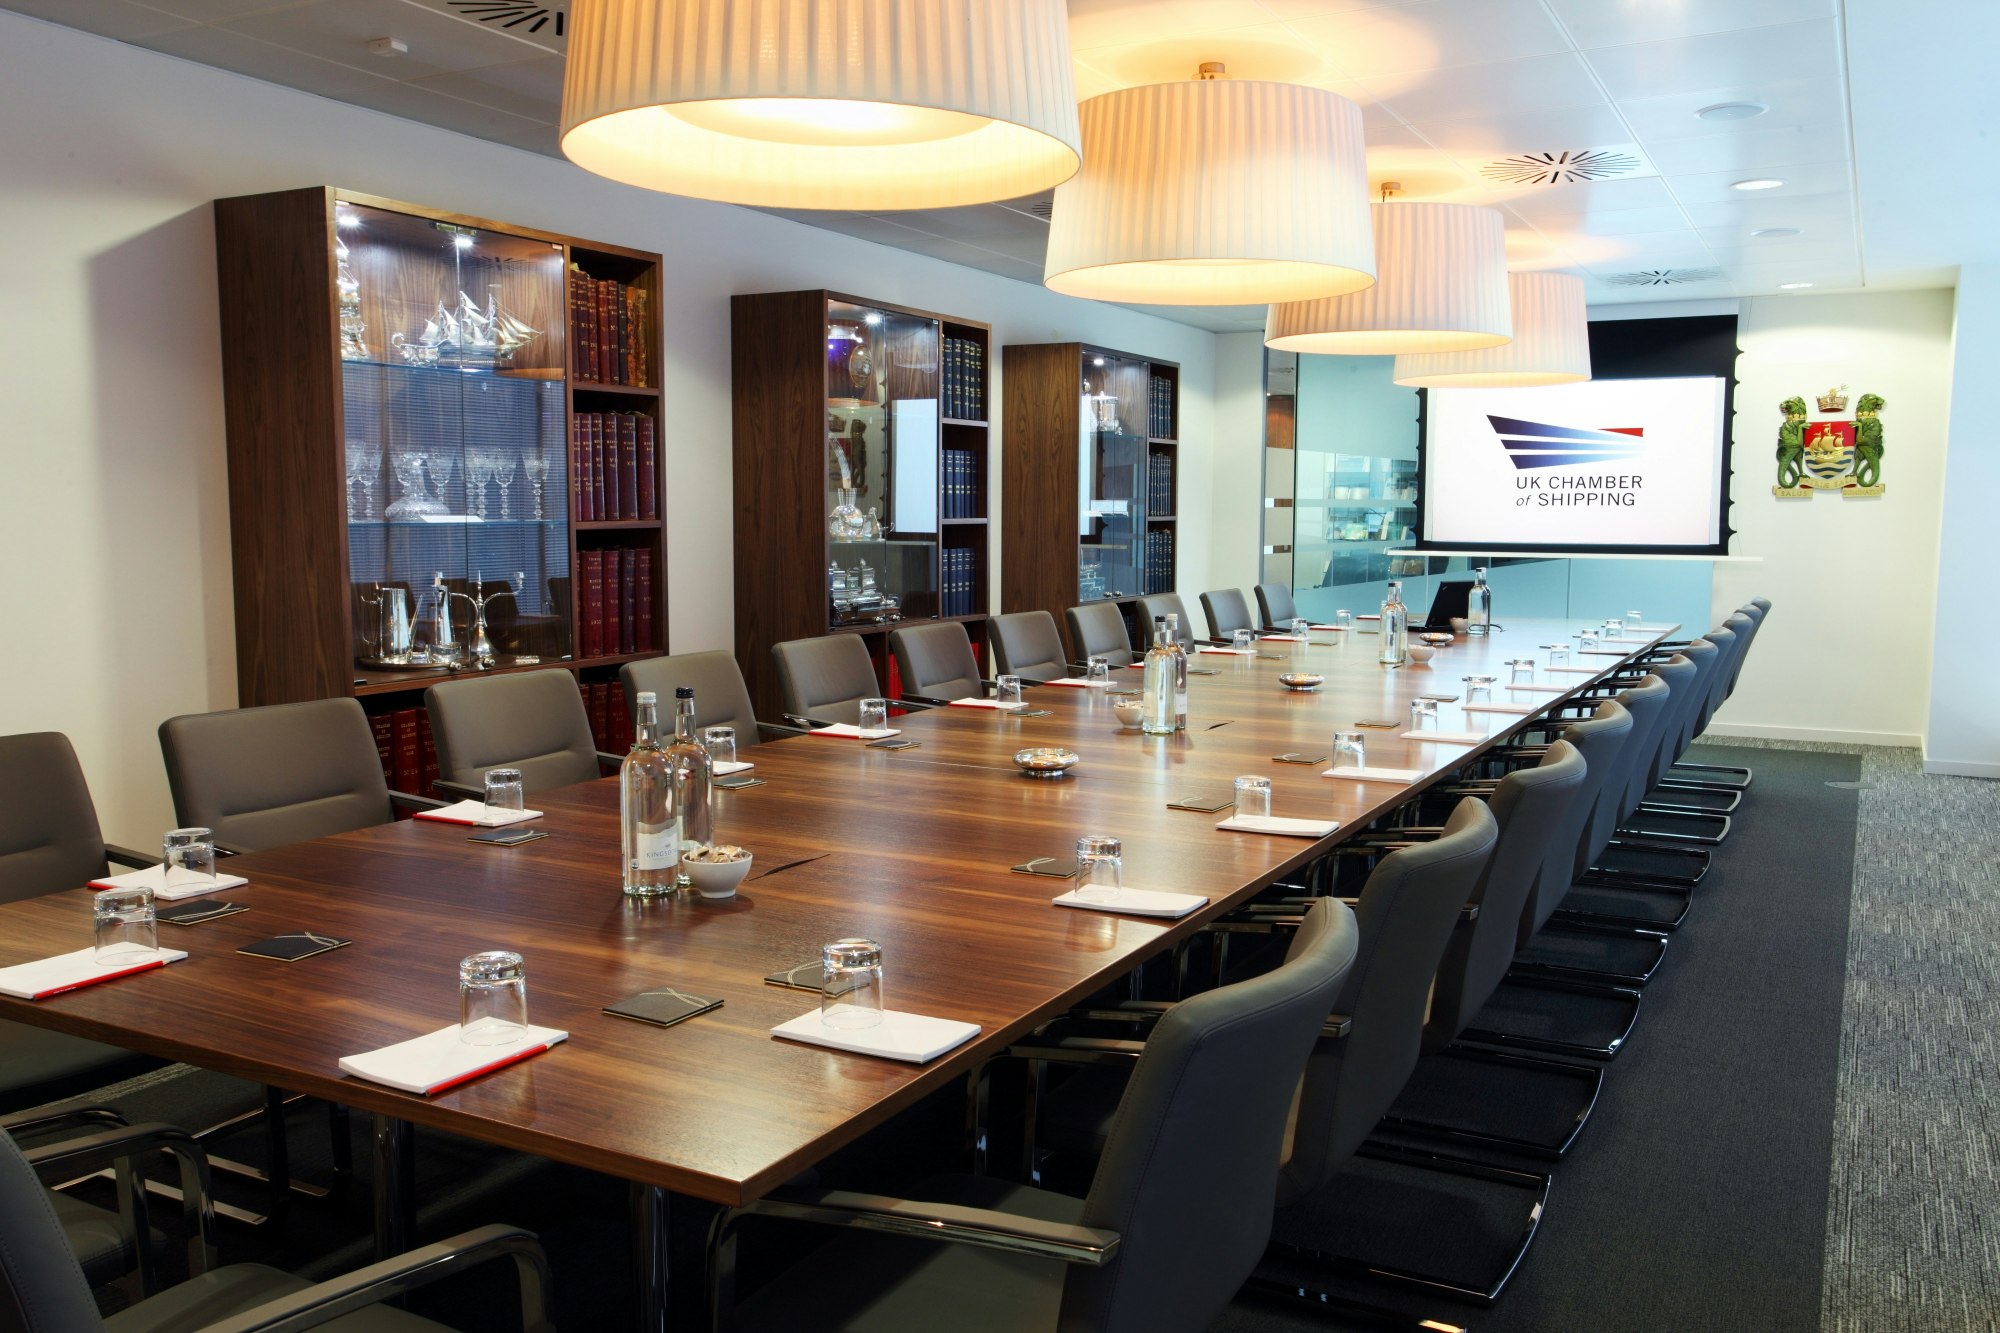 UK Chamber of Shipping - Boardroom image 3